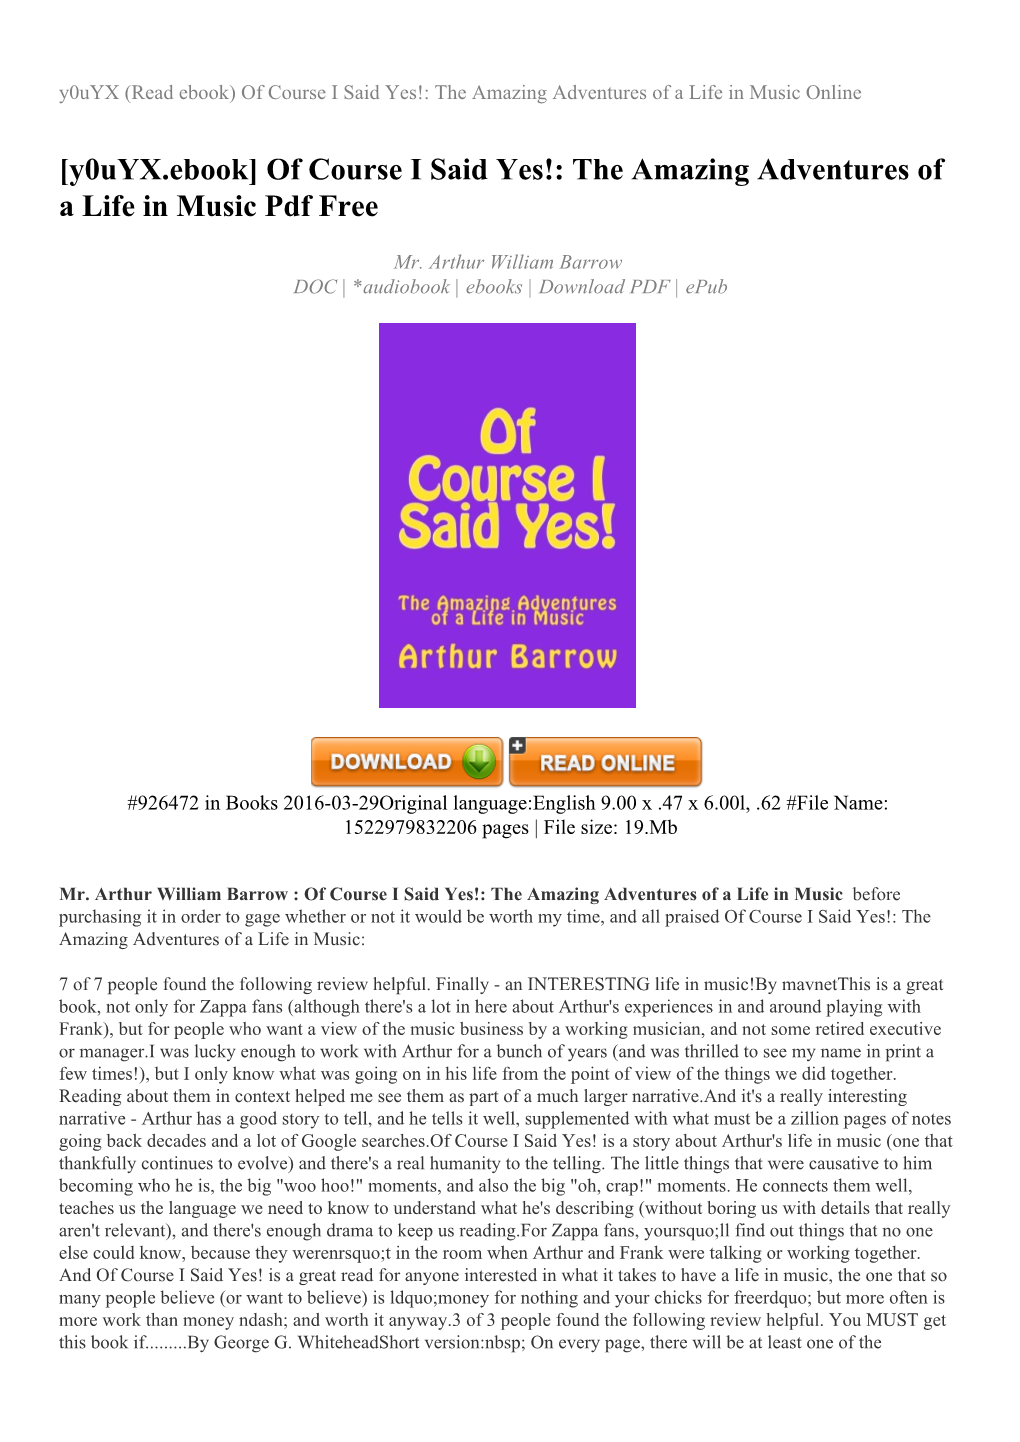 Of Course I Said Yes!: the Amazing Adventures of a Life in Music Online